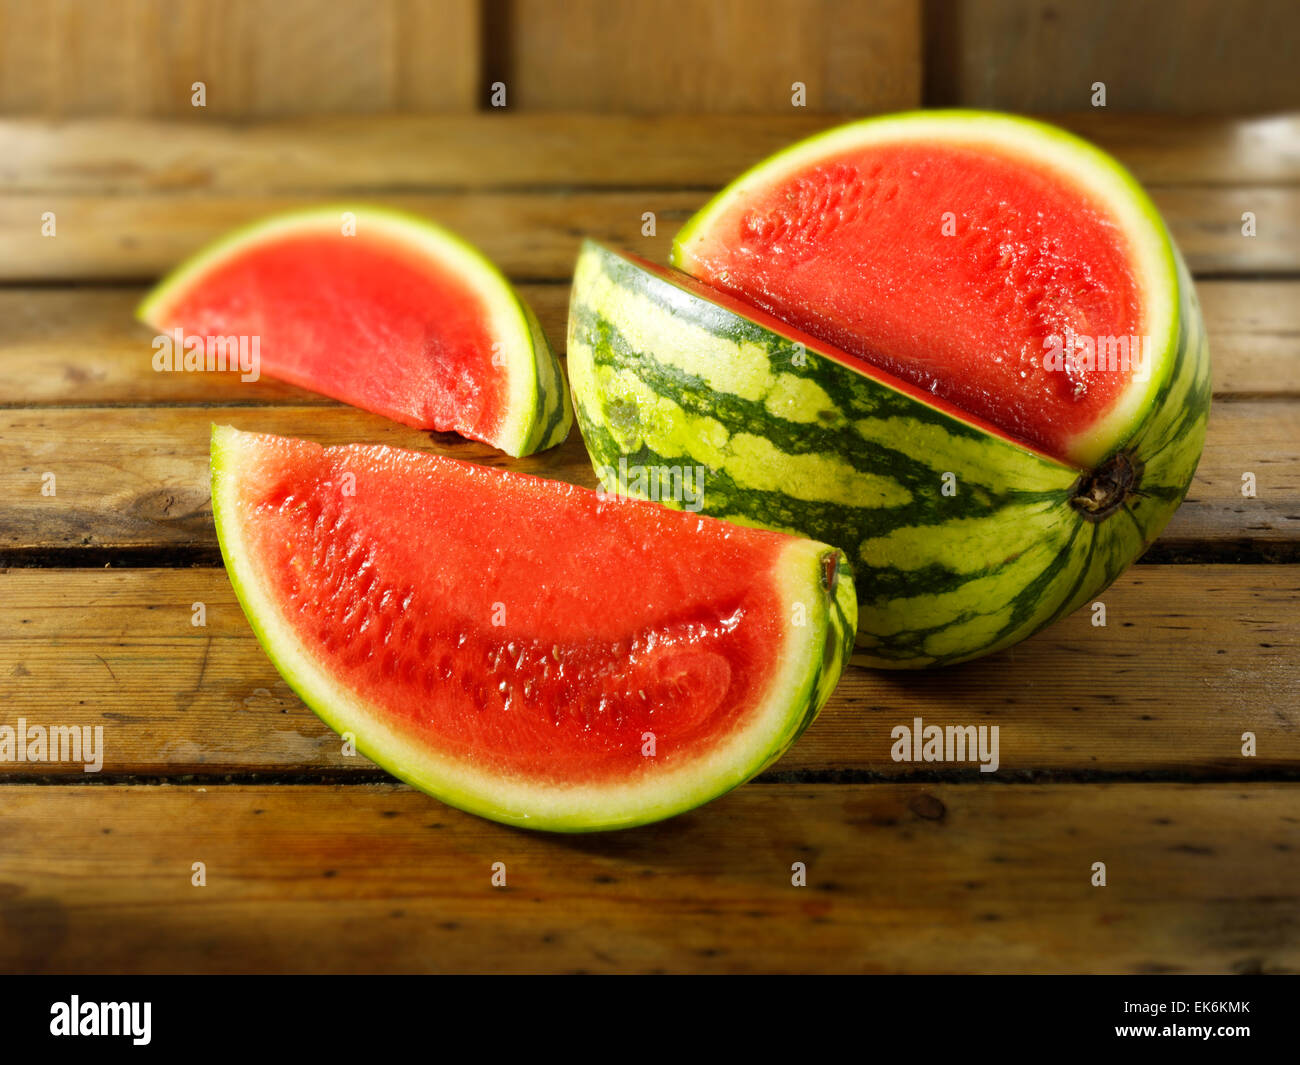 Fresh cut red watermelon, whole and sliced, on a wood background setting Stock Photo